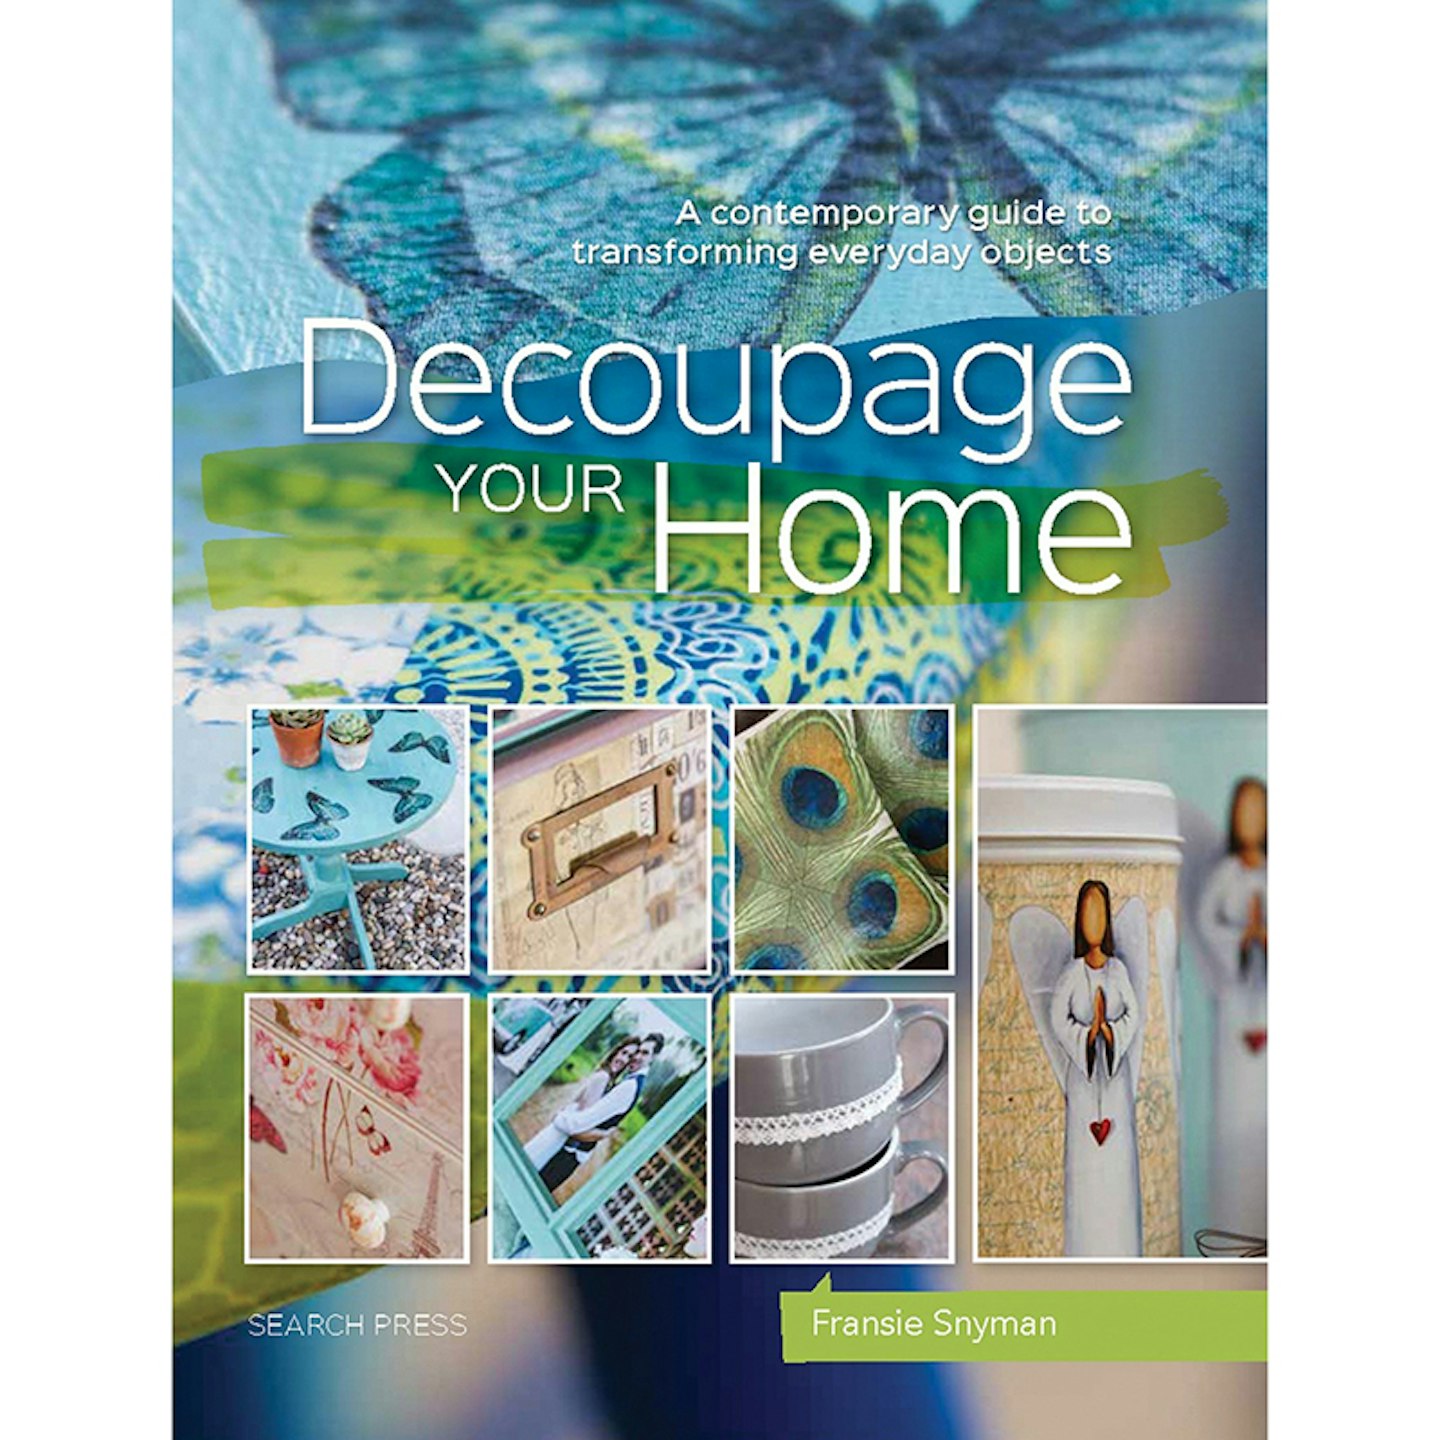 Decoupage Your Home: A Contemporary Guide to Transforming Everyday Objects by Fransie Snyman